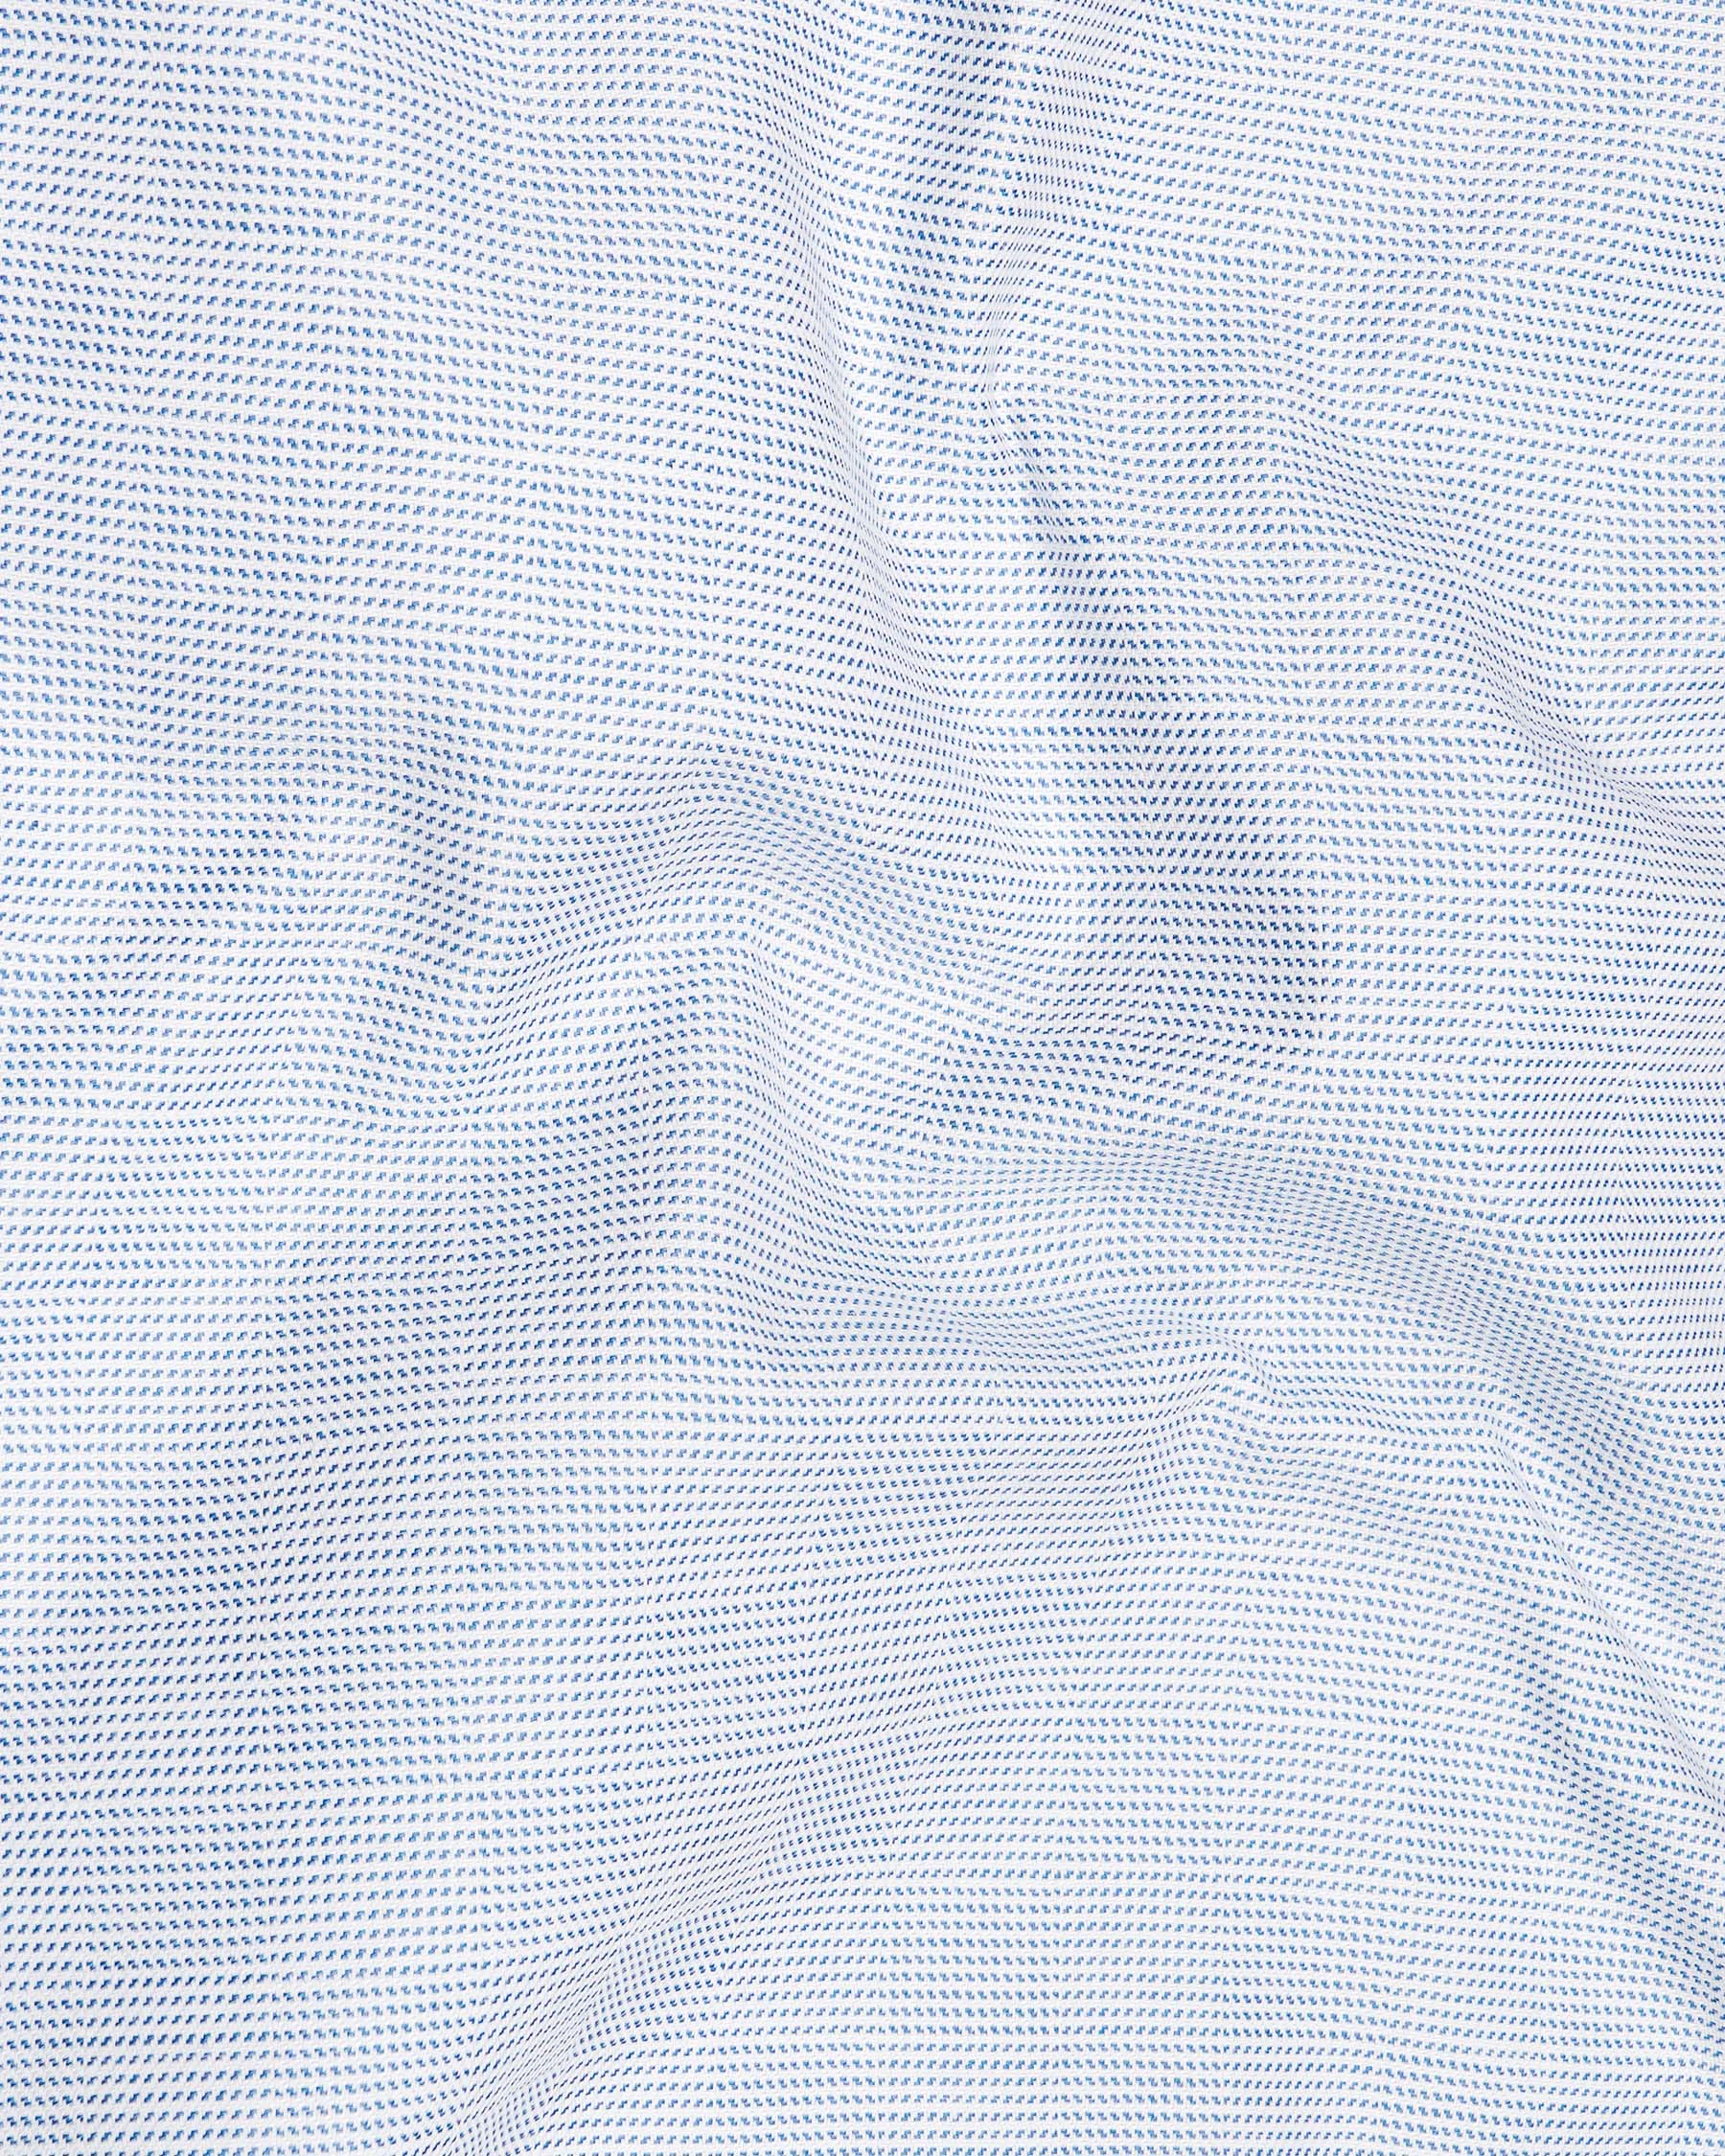 Ship Cove Blue and White Dobby Textured Premium Giza Cotton Shirt 7956-BD-38, 7956-BD-H-38, 7956-BD-39, 7956-BD-H-39, 7956-BD-40, 7956-BD-H-40, 7956-BD-42, 7956-BD-H-42, 7956-BD-44, 7956-BD-H-44, 7956-BD-46, 7956-BD-H-46, 7956-BD-48, 7956-BD-H-48, 7956-BD-50, 7956-BD-H-50, 7956-BD-52, 7956-BD-H-52